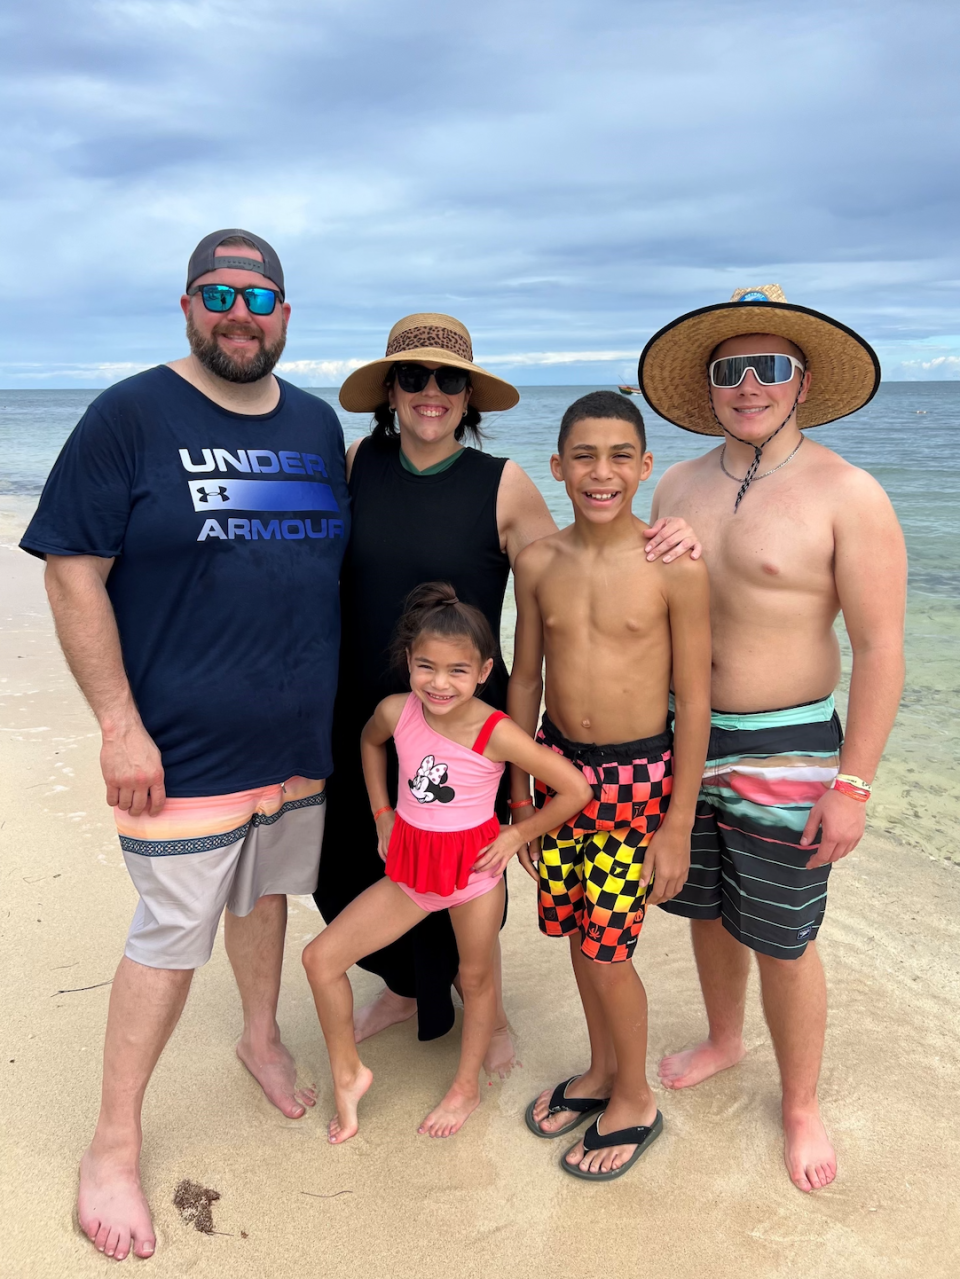 Jessica Morris (pictured with her family) started thinking about her short-term future, including a Disney Cruise with her husband and their three kids.